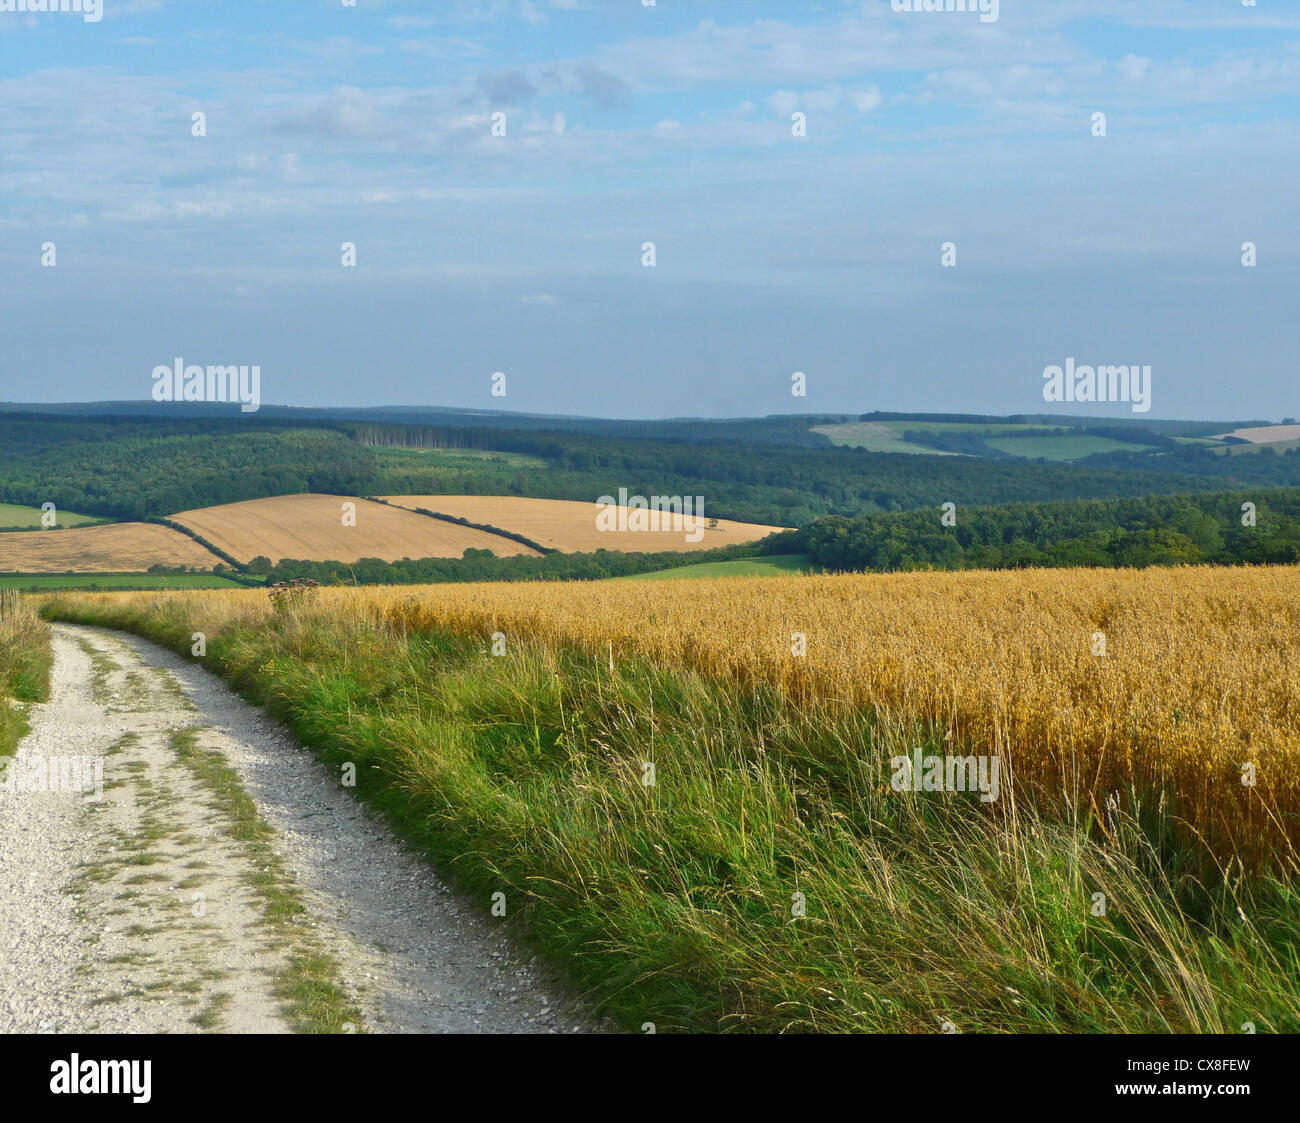 A view of the South Downs Way in West Sussex. This is a National Trail in the form of a 100 mile path for walkers, cyclists and horse riders between Winchester and Eastbourne. Stock Photo